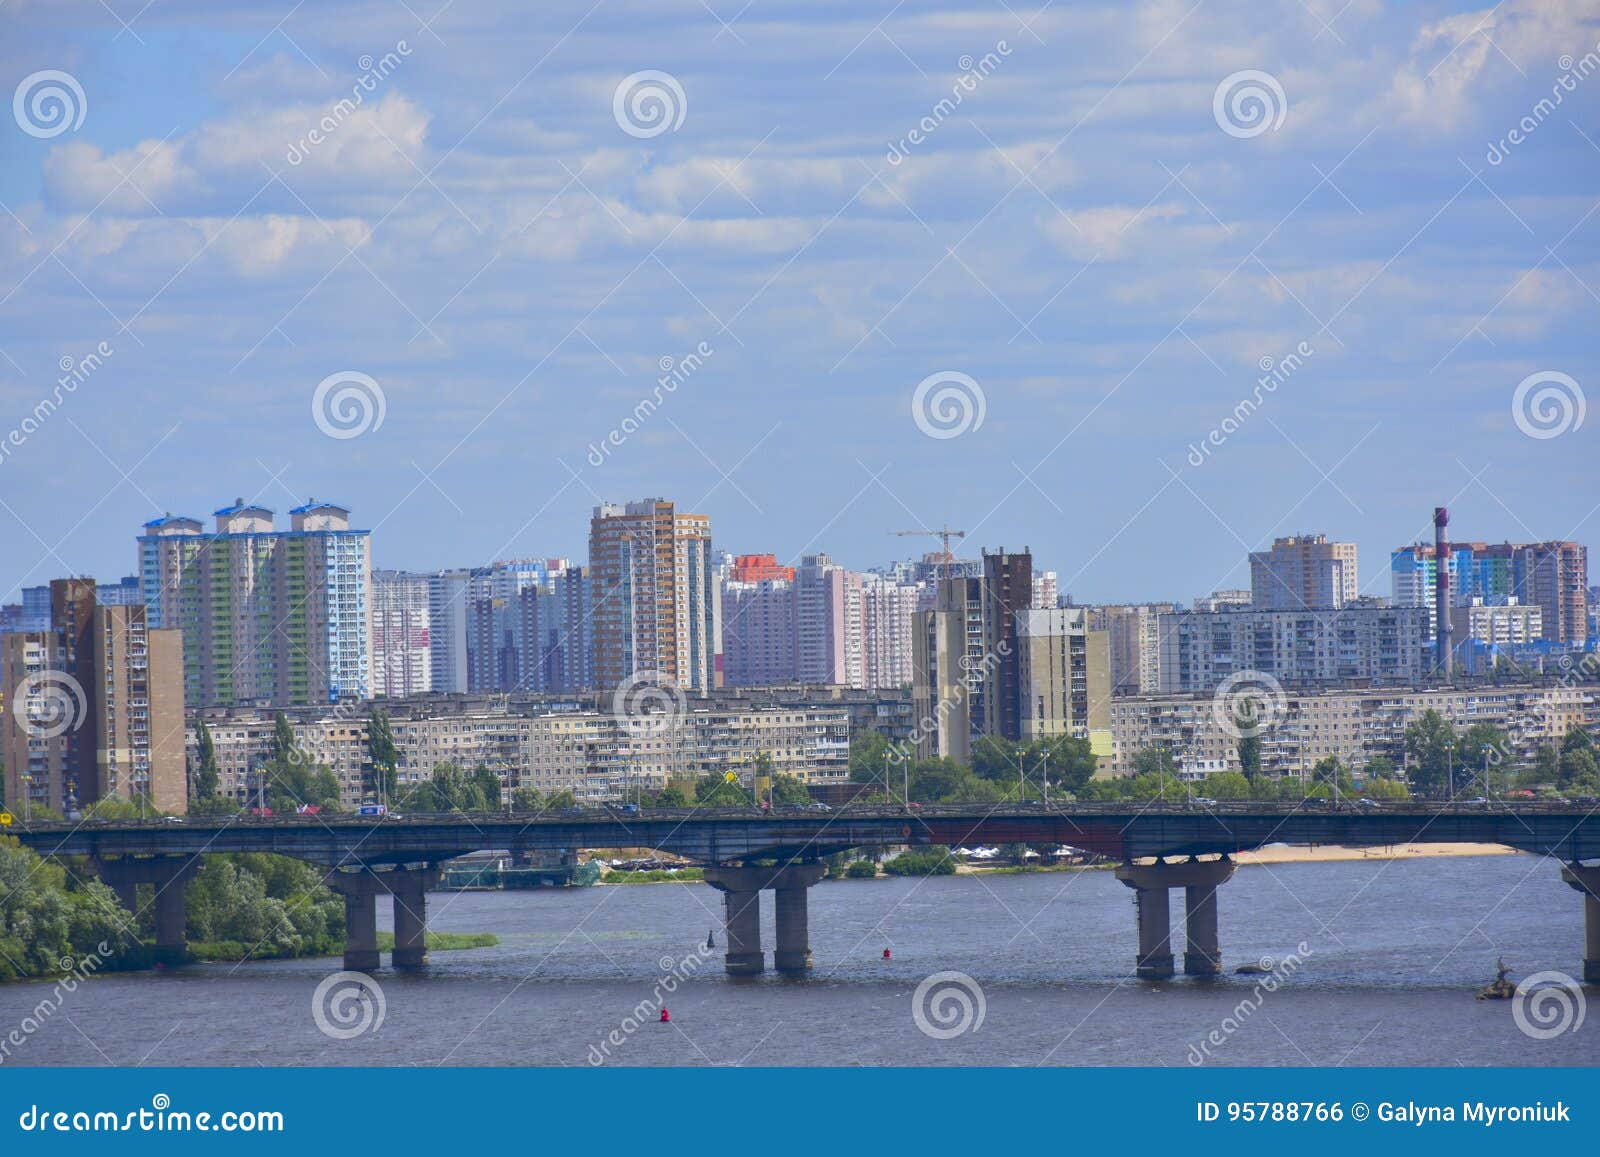 panorama of a large beautiful city view of the city and sky